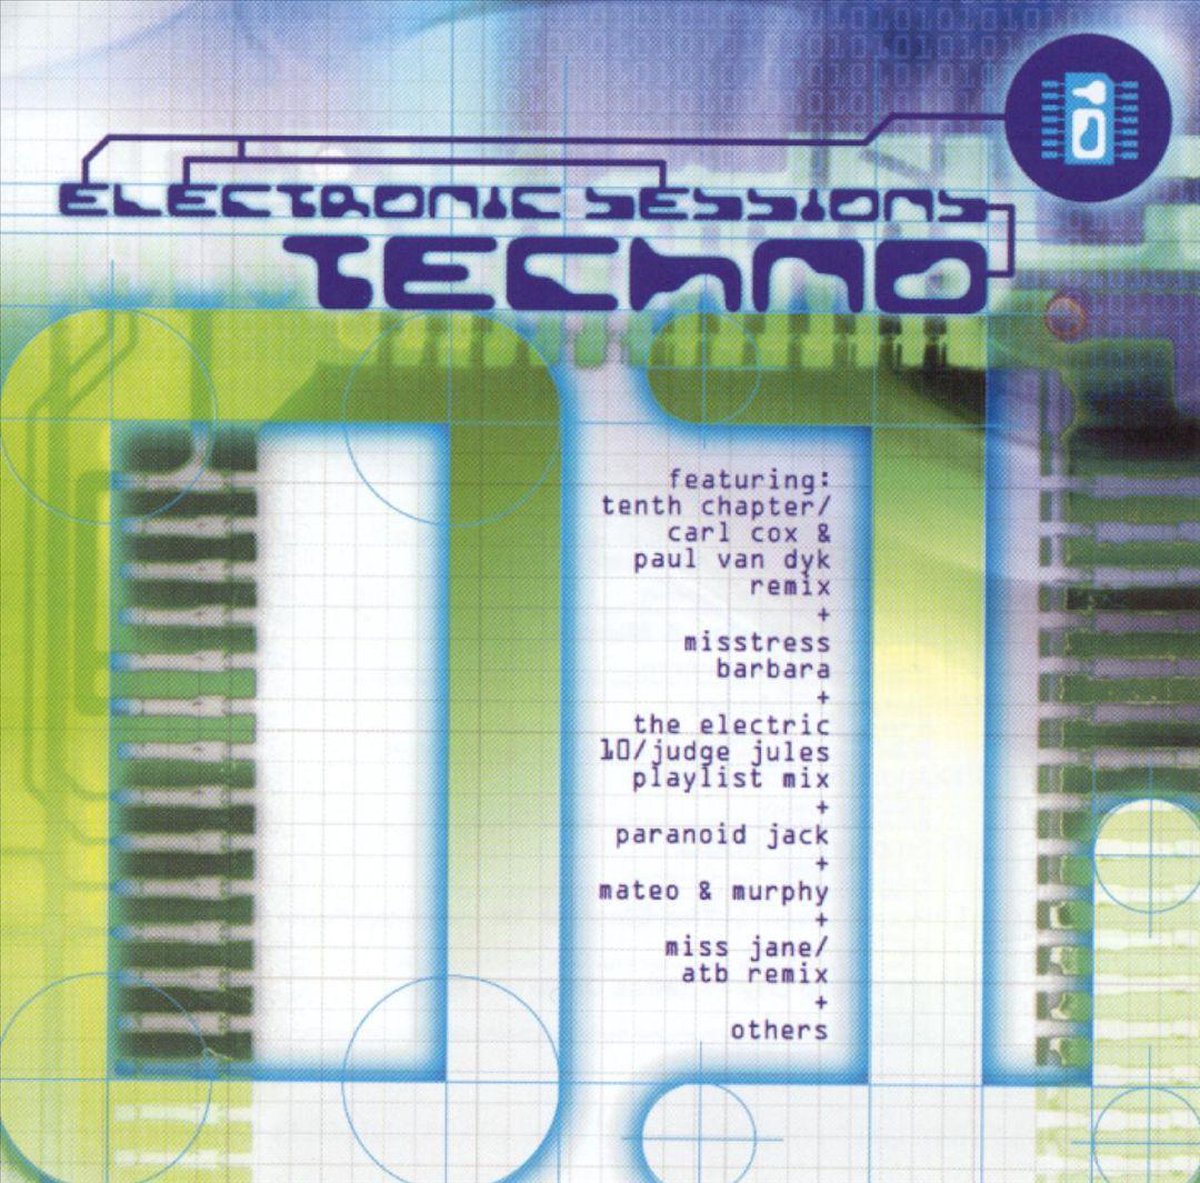 Electronic Sessions: Techno - various artists